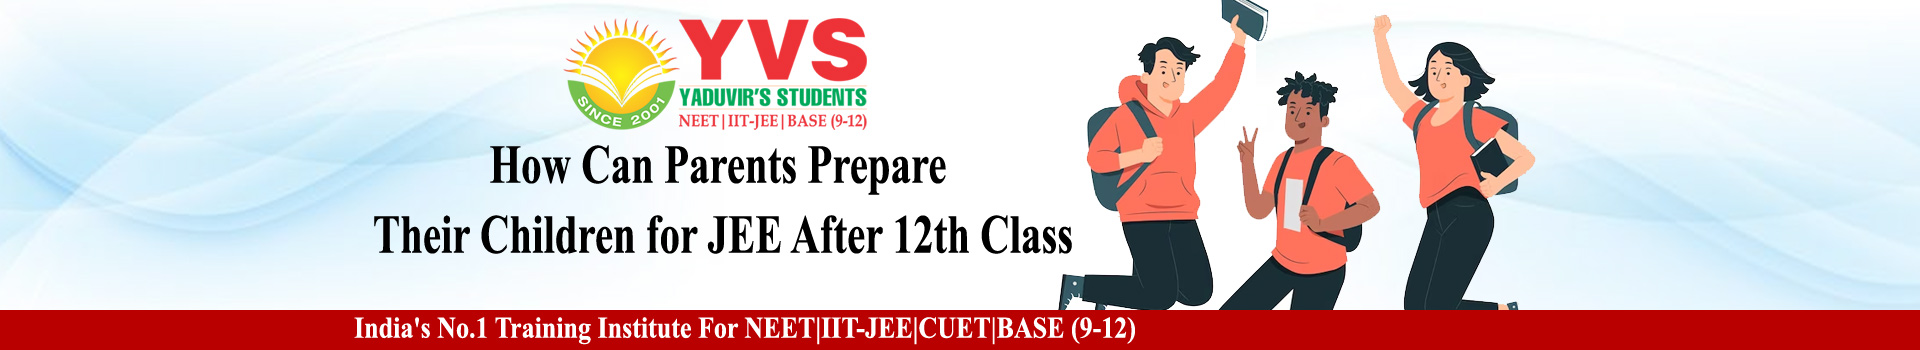 how-can-parents-prepare-their-children-for-jee-after-12th-class